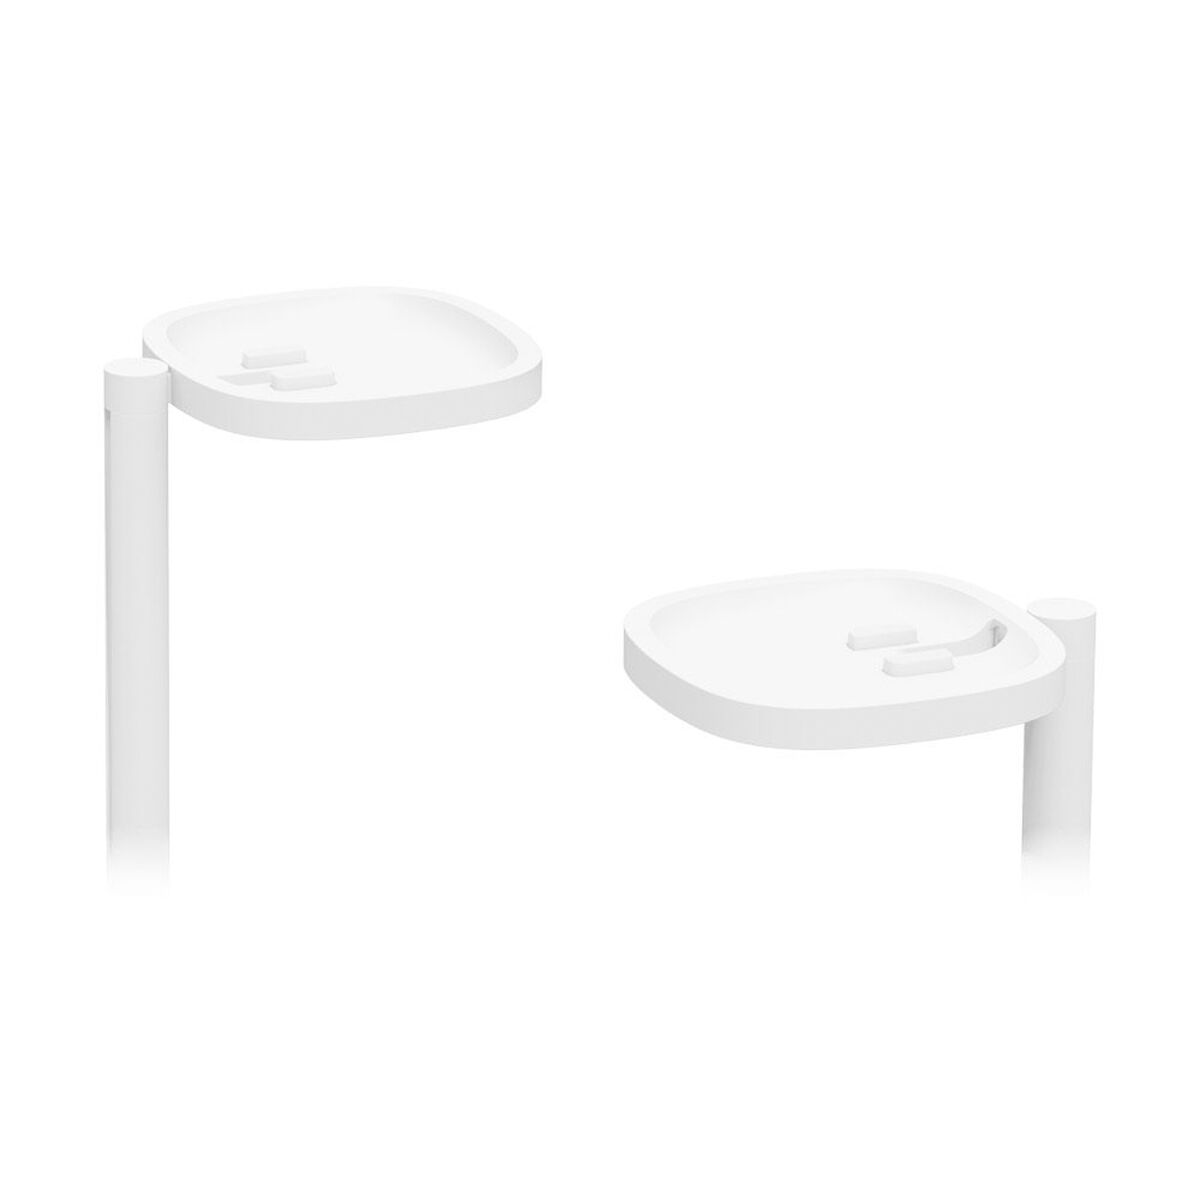 Speaker Stand Sonos ONE and PLAY White (2 Units), Sonos, Electronics, Audio and Hi-Fi equipment, speaker-stand-sonos-one-and-play-white-2-units, Brand_Sonos, category-reference-2609, category-reference-2637, category-reference-2882, category-reference-t-19653, category-reference-t-19899, category-reference-t-21329, category-reference-t-25554, category-reference-t-7441, cinema and television, Condition_NEW, music, Price_200 - 300, RiotNook